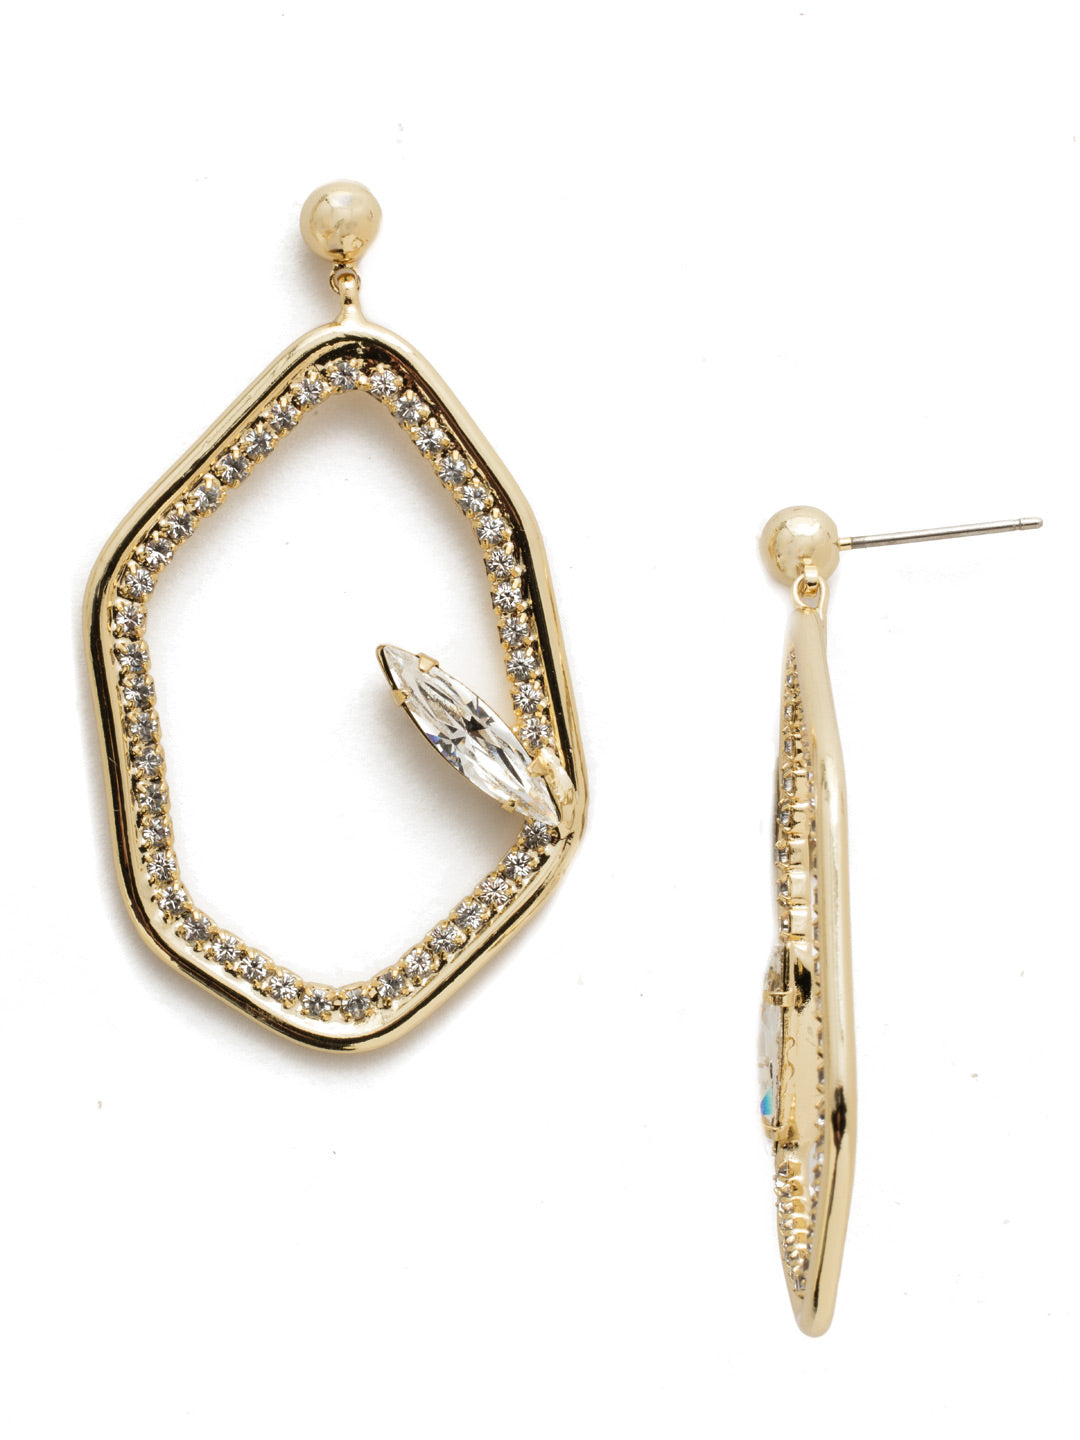 Gemma Dangle Earrings - EEH28BGCRY - <p>These posts are long on style. Fasten on the fun shape surrounded by sparkling crystal pieces and you're sure to be the center of attention. From Sorrelli's Crystal collection in our Bright Gold-tone finish.</p>